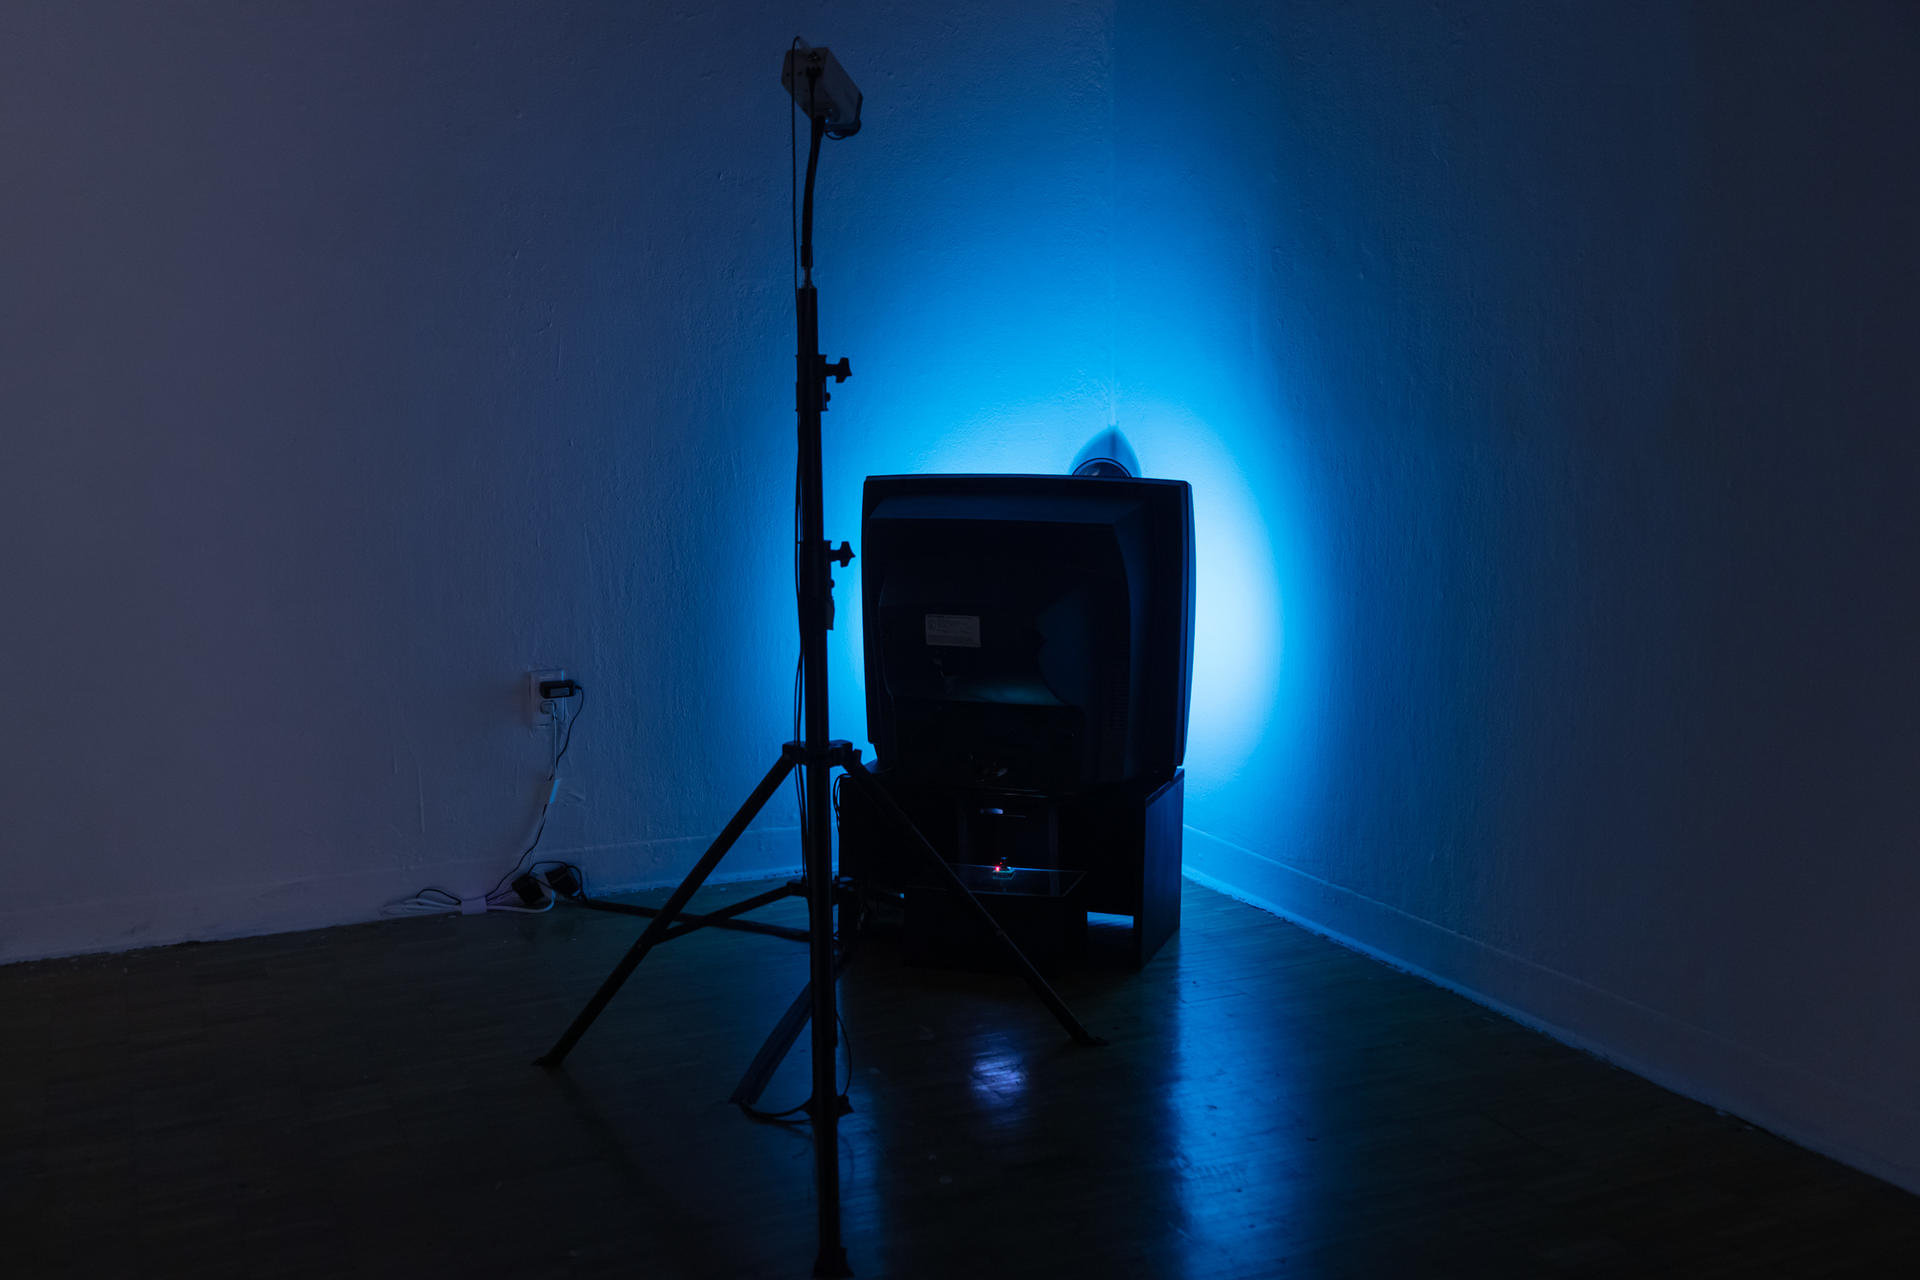 A camera on tripod and a TV placed against a wall corner, reflecting colorful light.